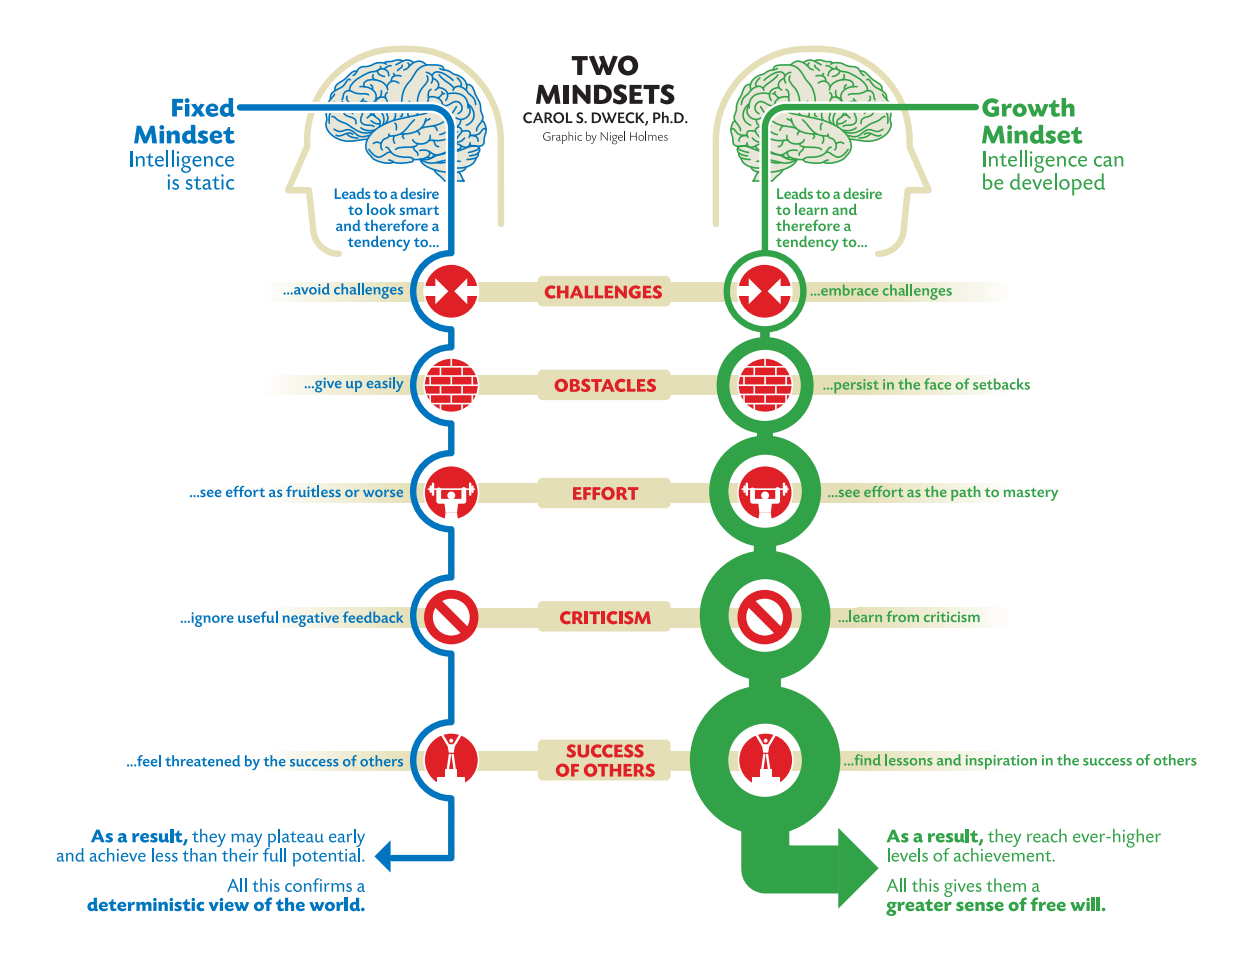 INformational graphic comparing and contrasting the qualities of a fixed mindset and a growth mindset.